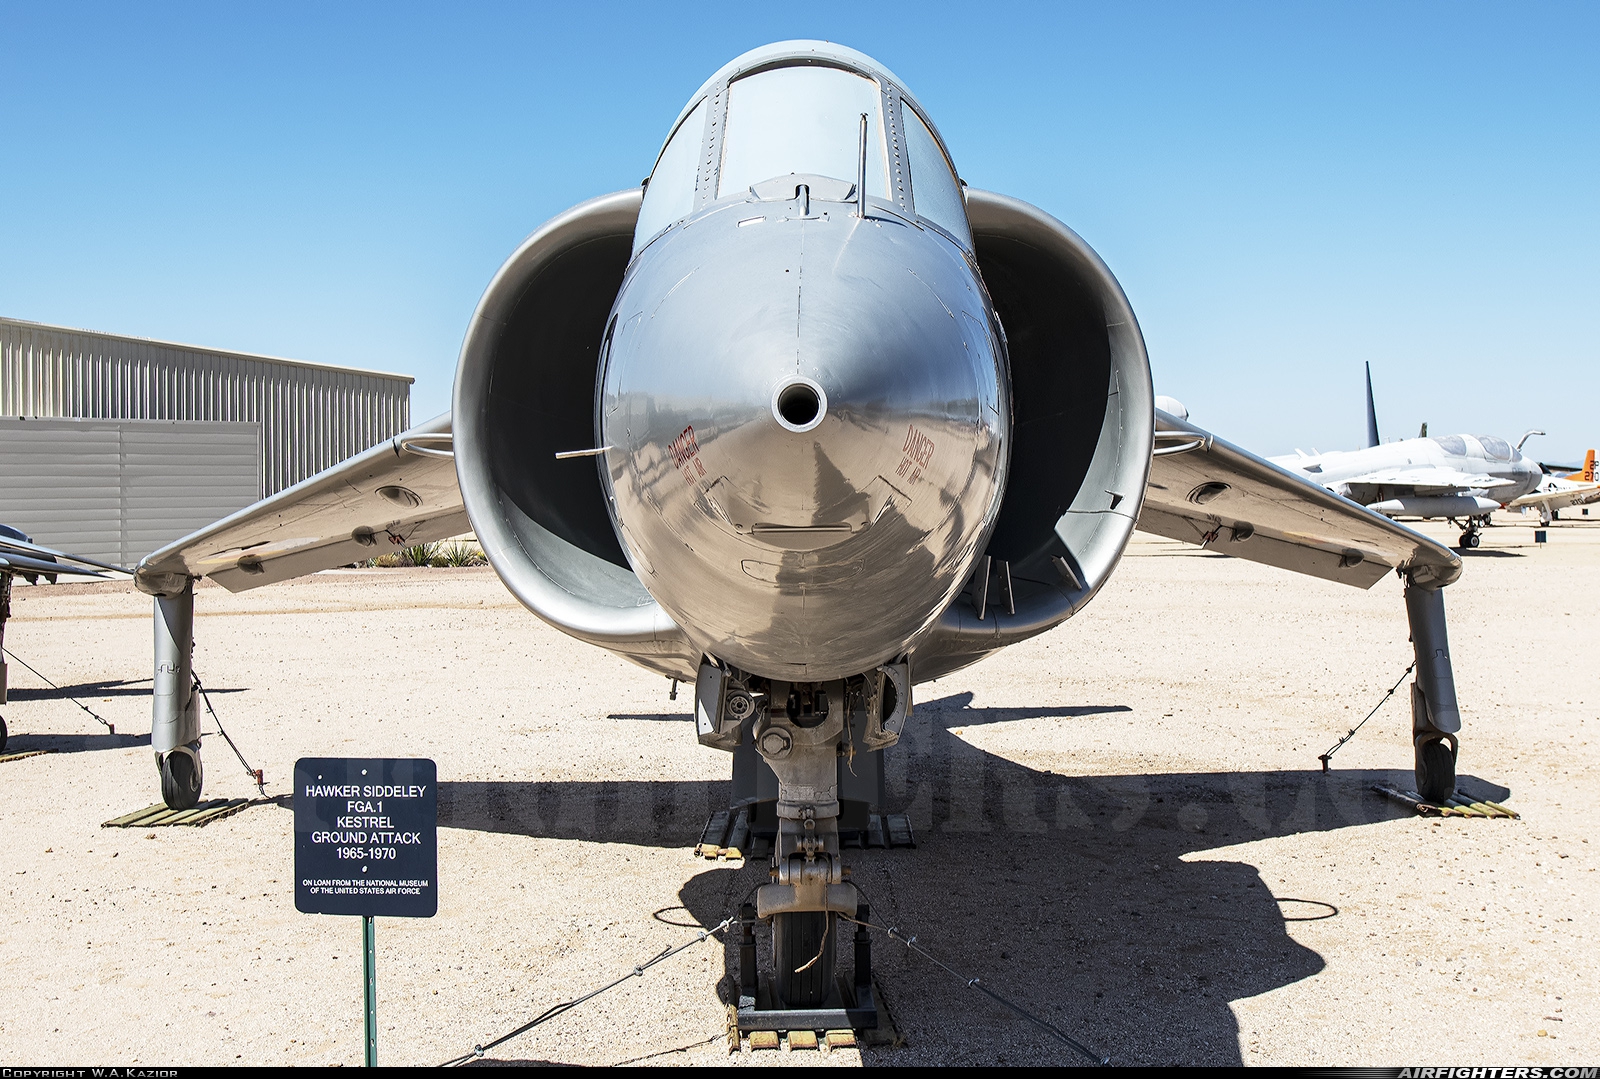 UK - Air Force Hawker Siddeley XV-6A Kestrel XS690 at Tucson - Pima Air and Space Museum, USA